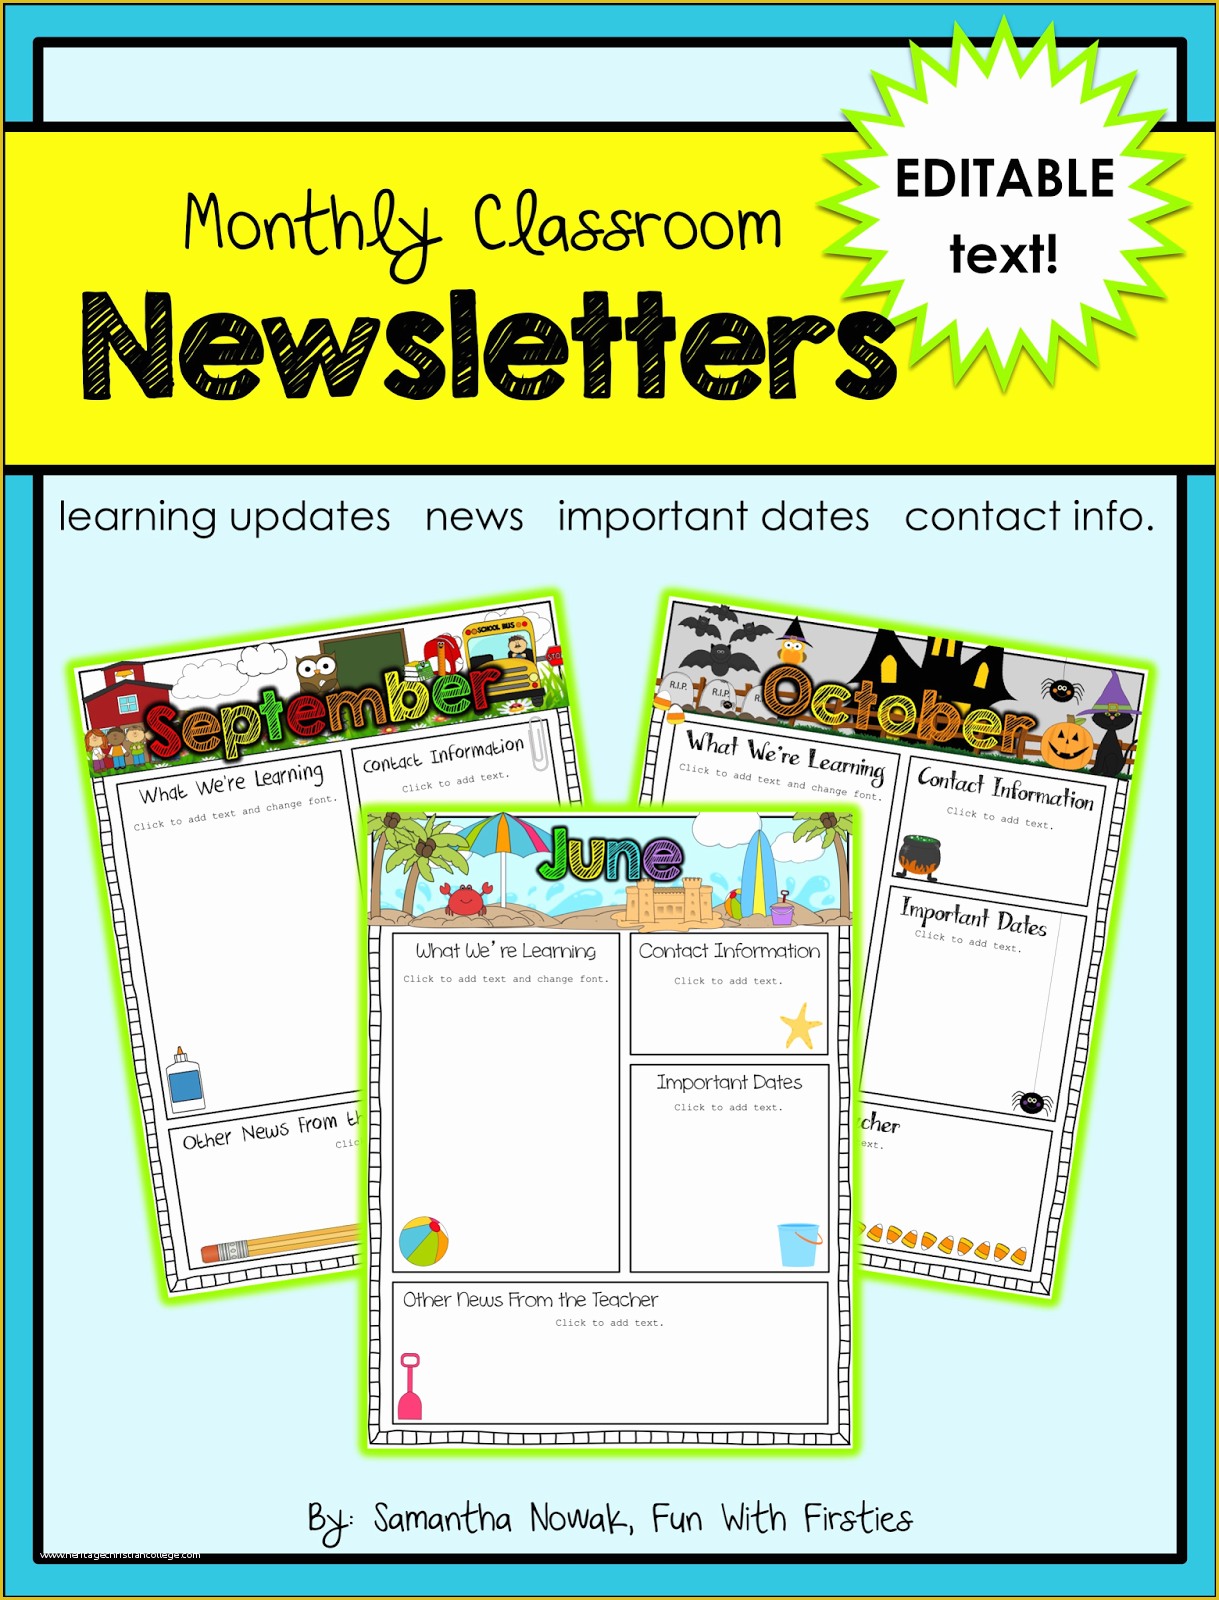 School Newsletter Templates Free Of Fun with Firsties Best Of Back to School